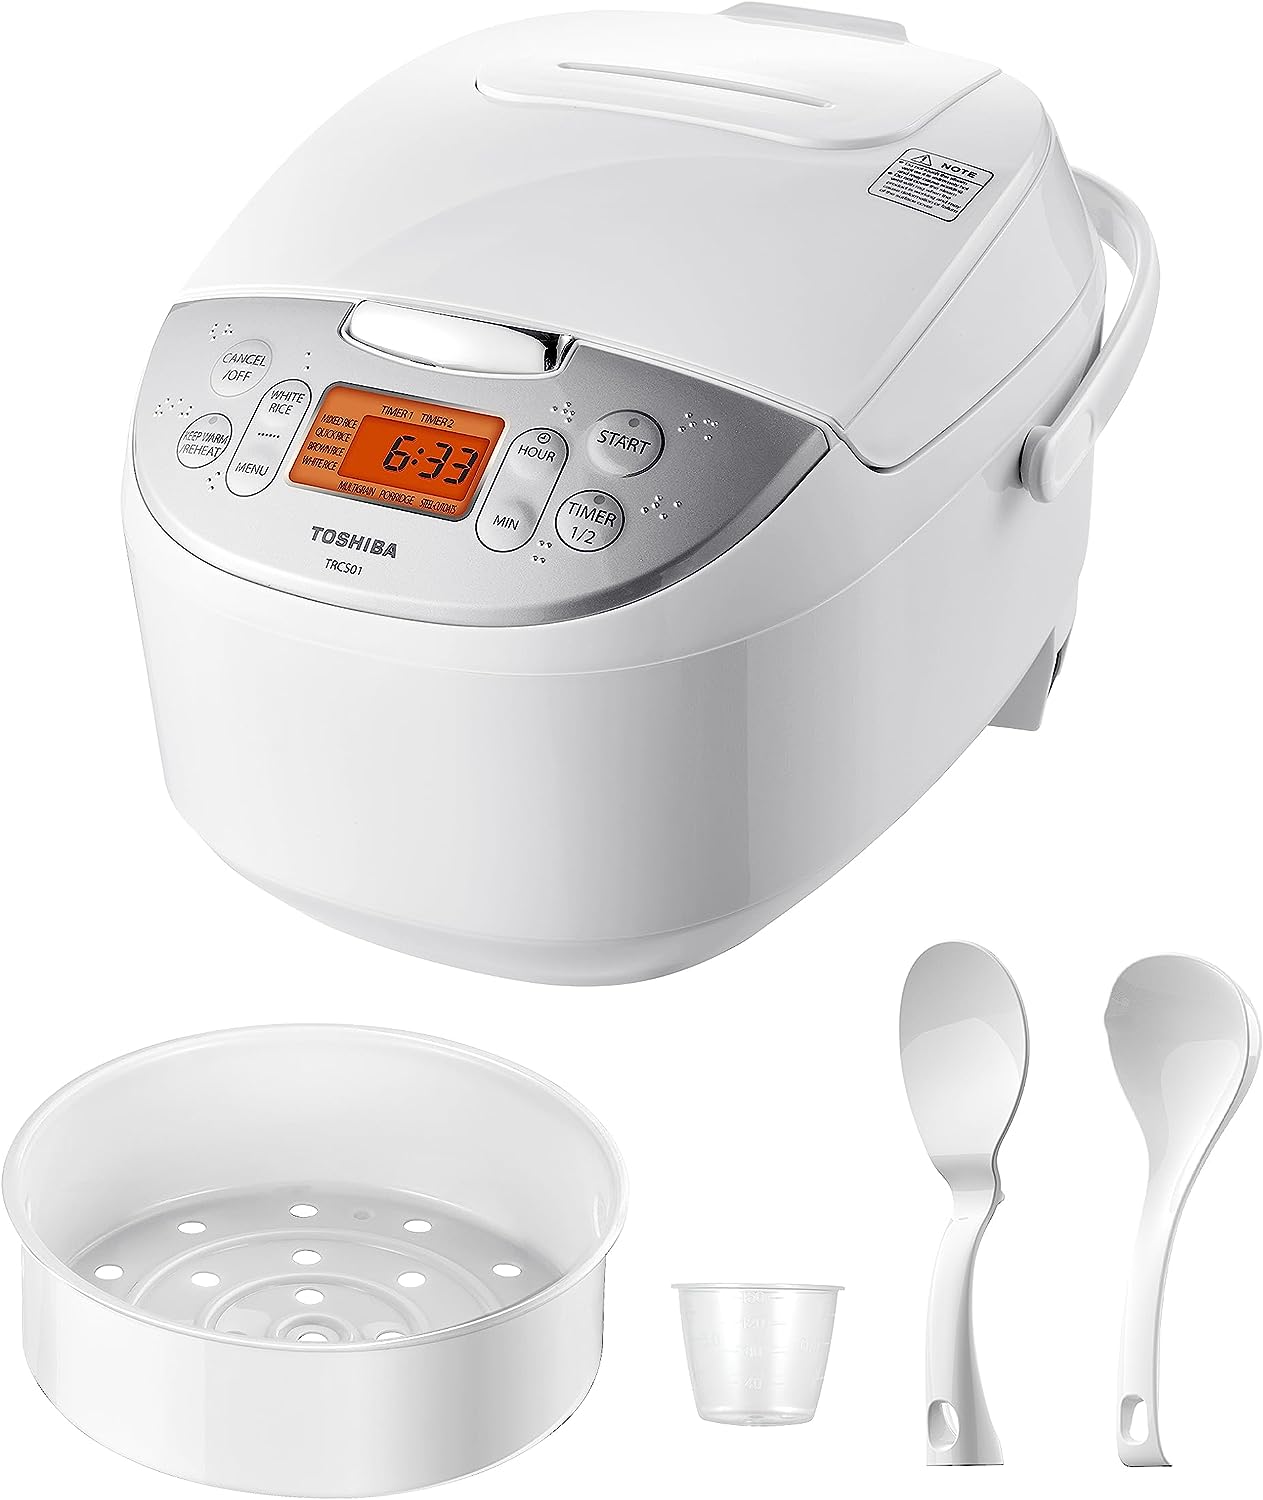 Toshiba Rice Cooker 6 Cup Uncooked – Japanese Rice Cooker with Fuzzy Logic  Technology, 7 Cooking Functions, Digital Display, 2 Delay Timers and Auto  Keep Warm, Non-Stick Inner Pot, White: Home & Kitchen 